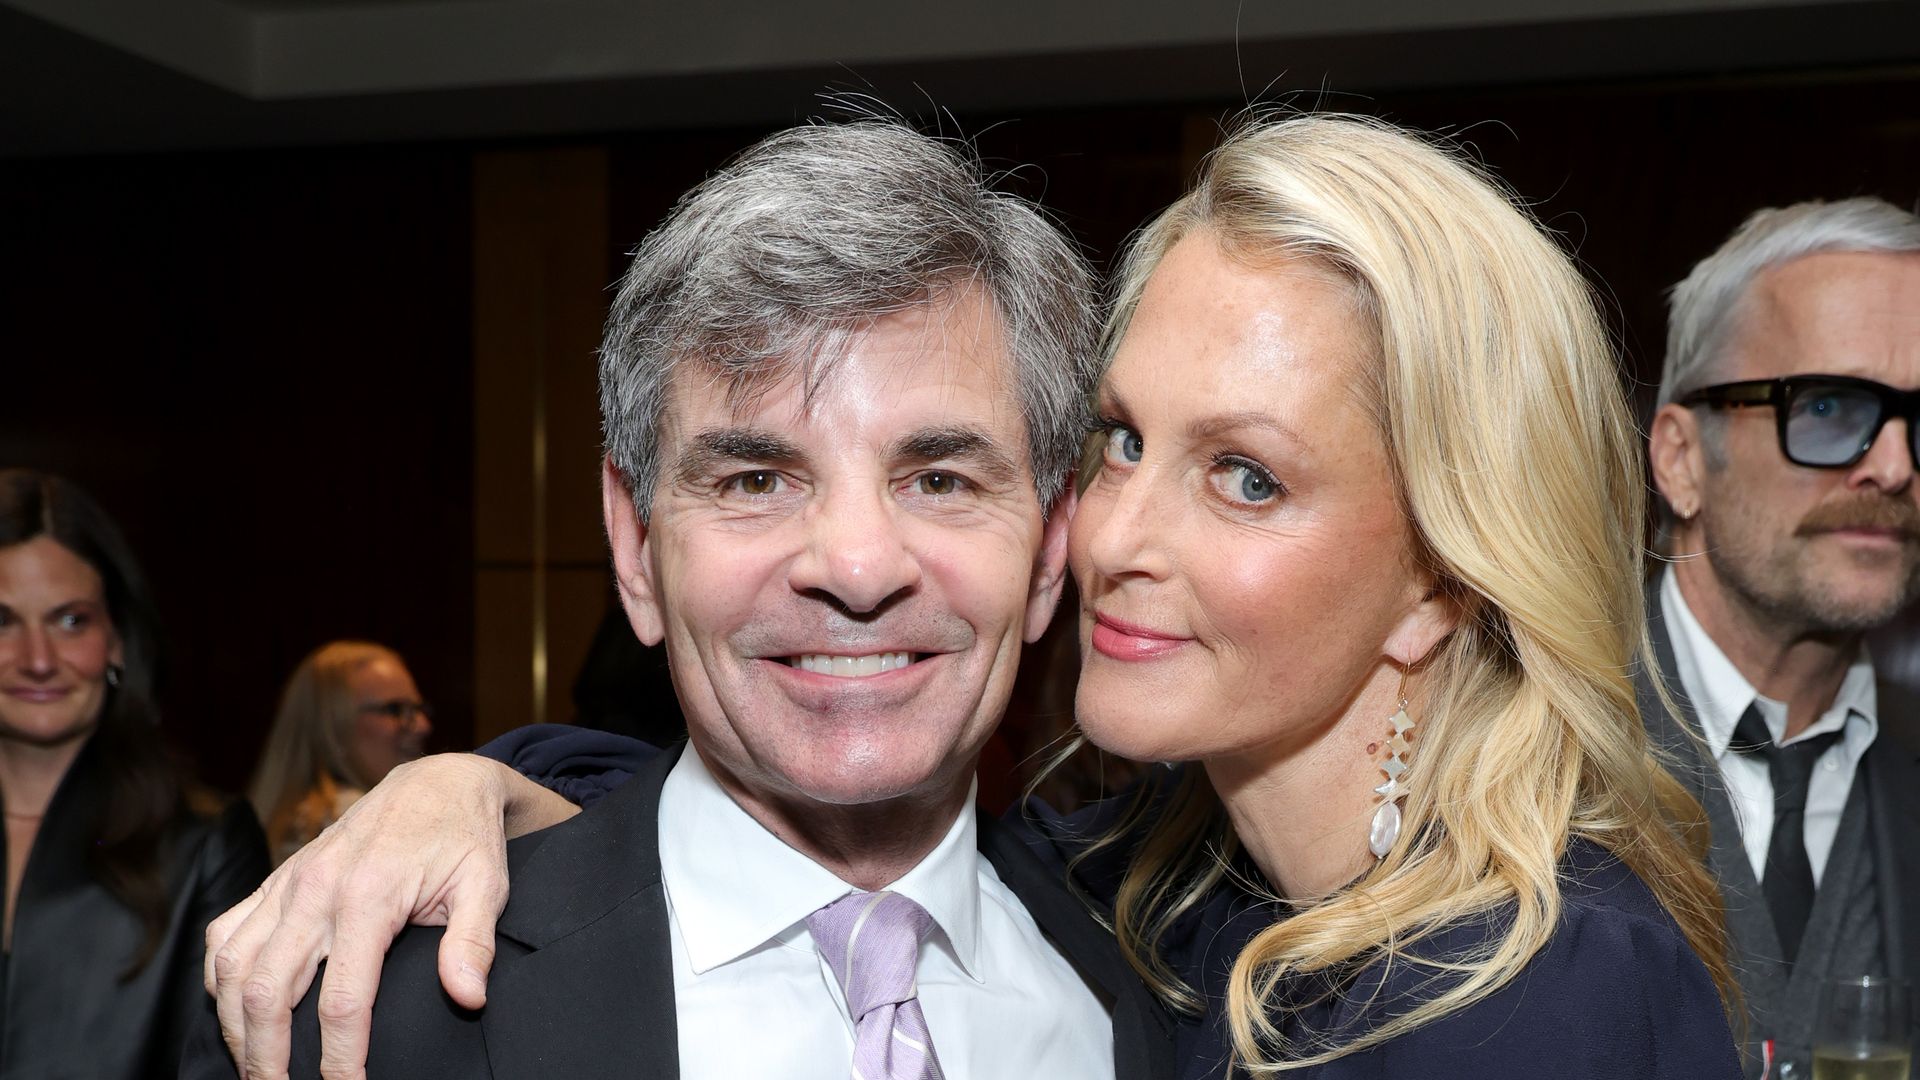 GMA's George Stephanopoulos is so 'proud' of wife Ali Wentworth ahead of incredible new Netflix project